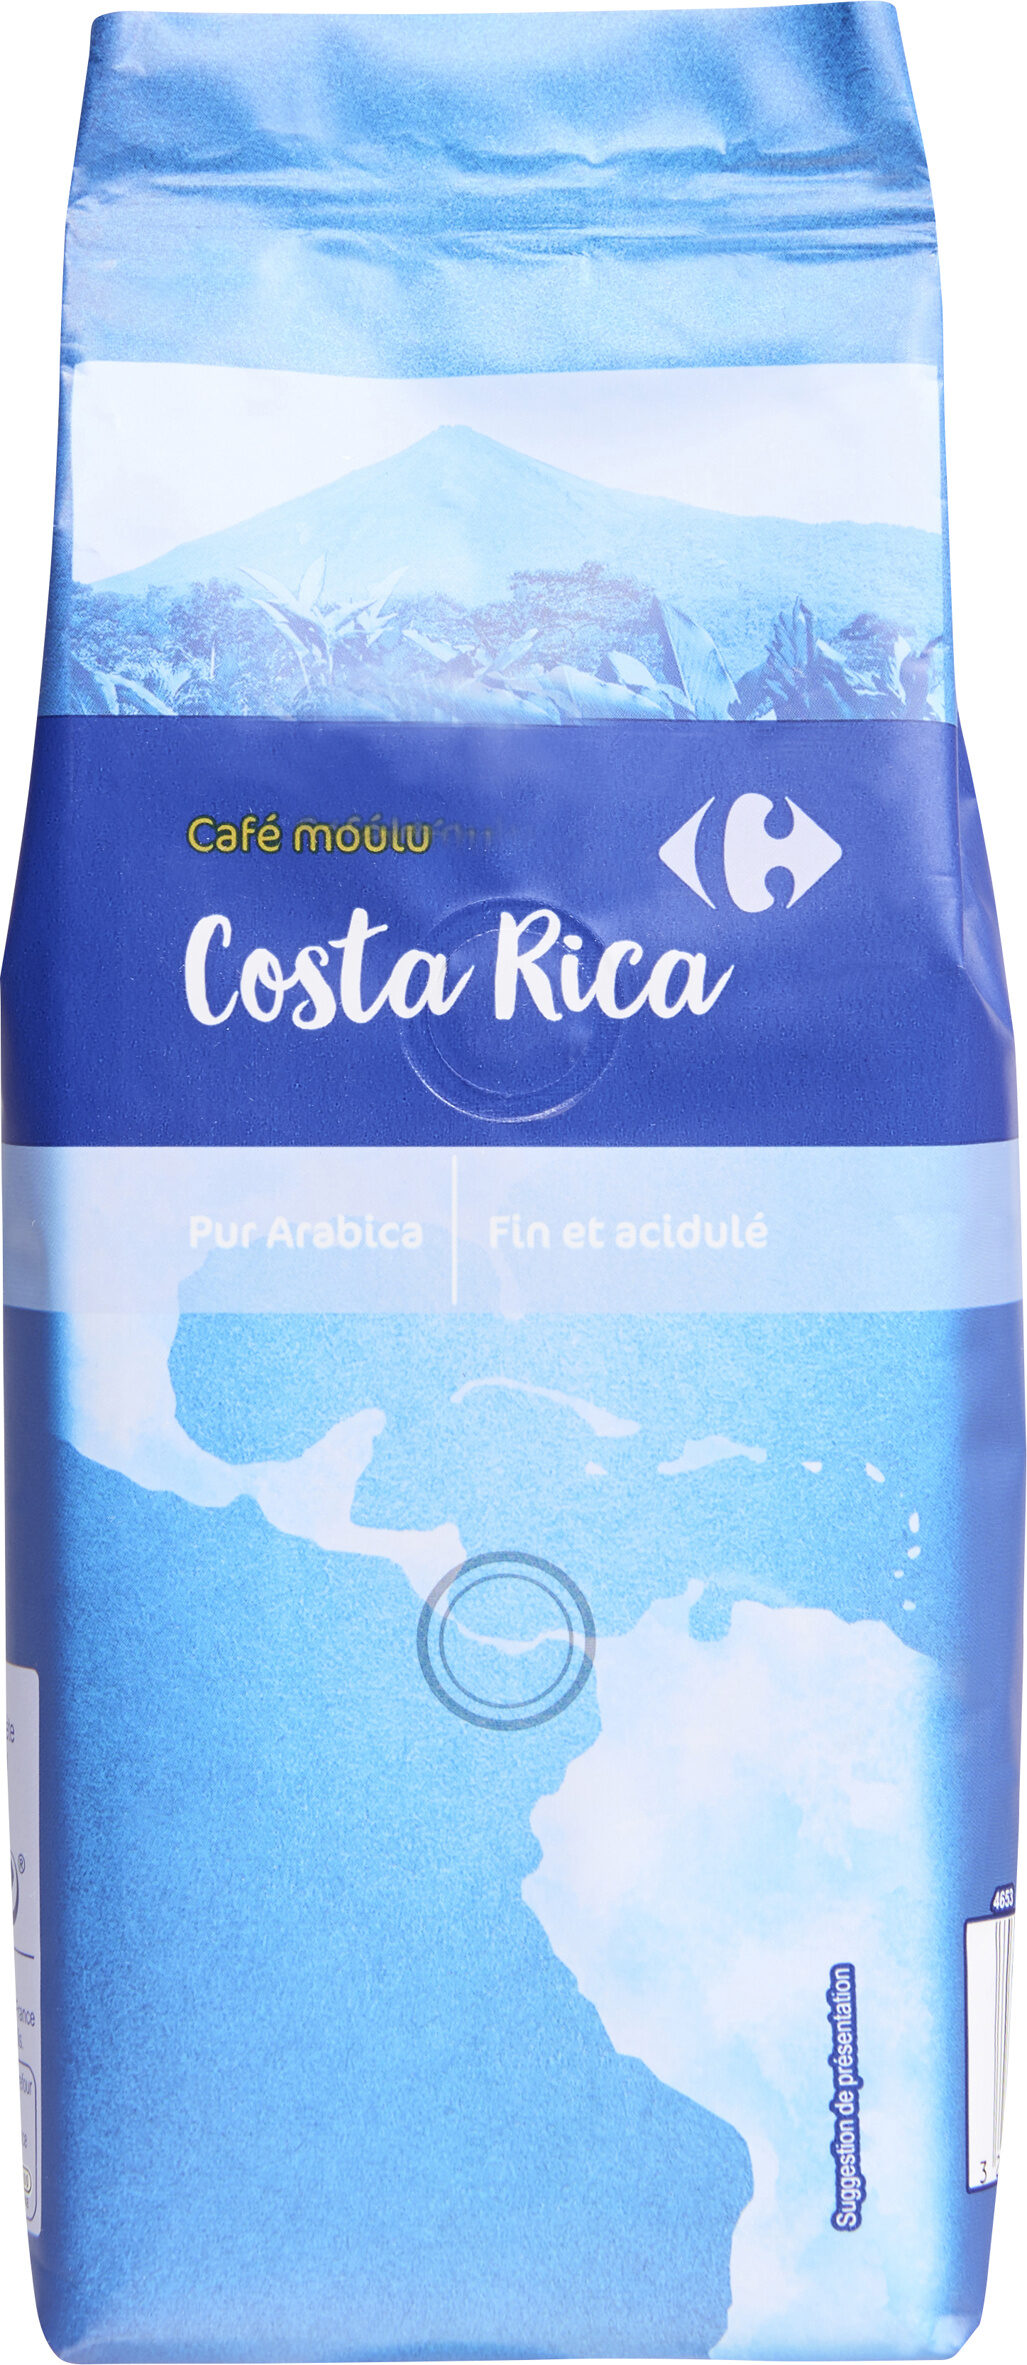 Costa rica - Product - fr